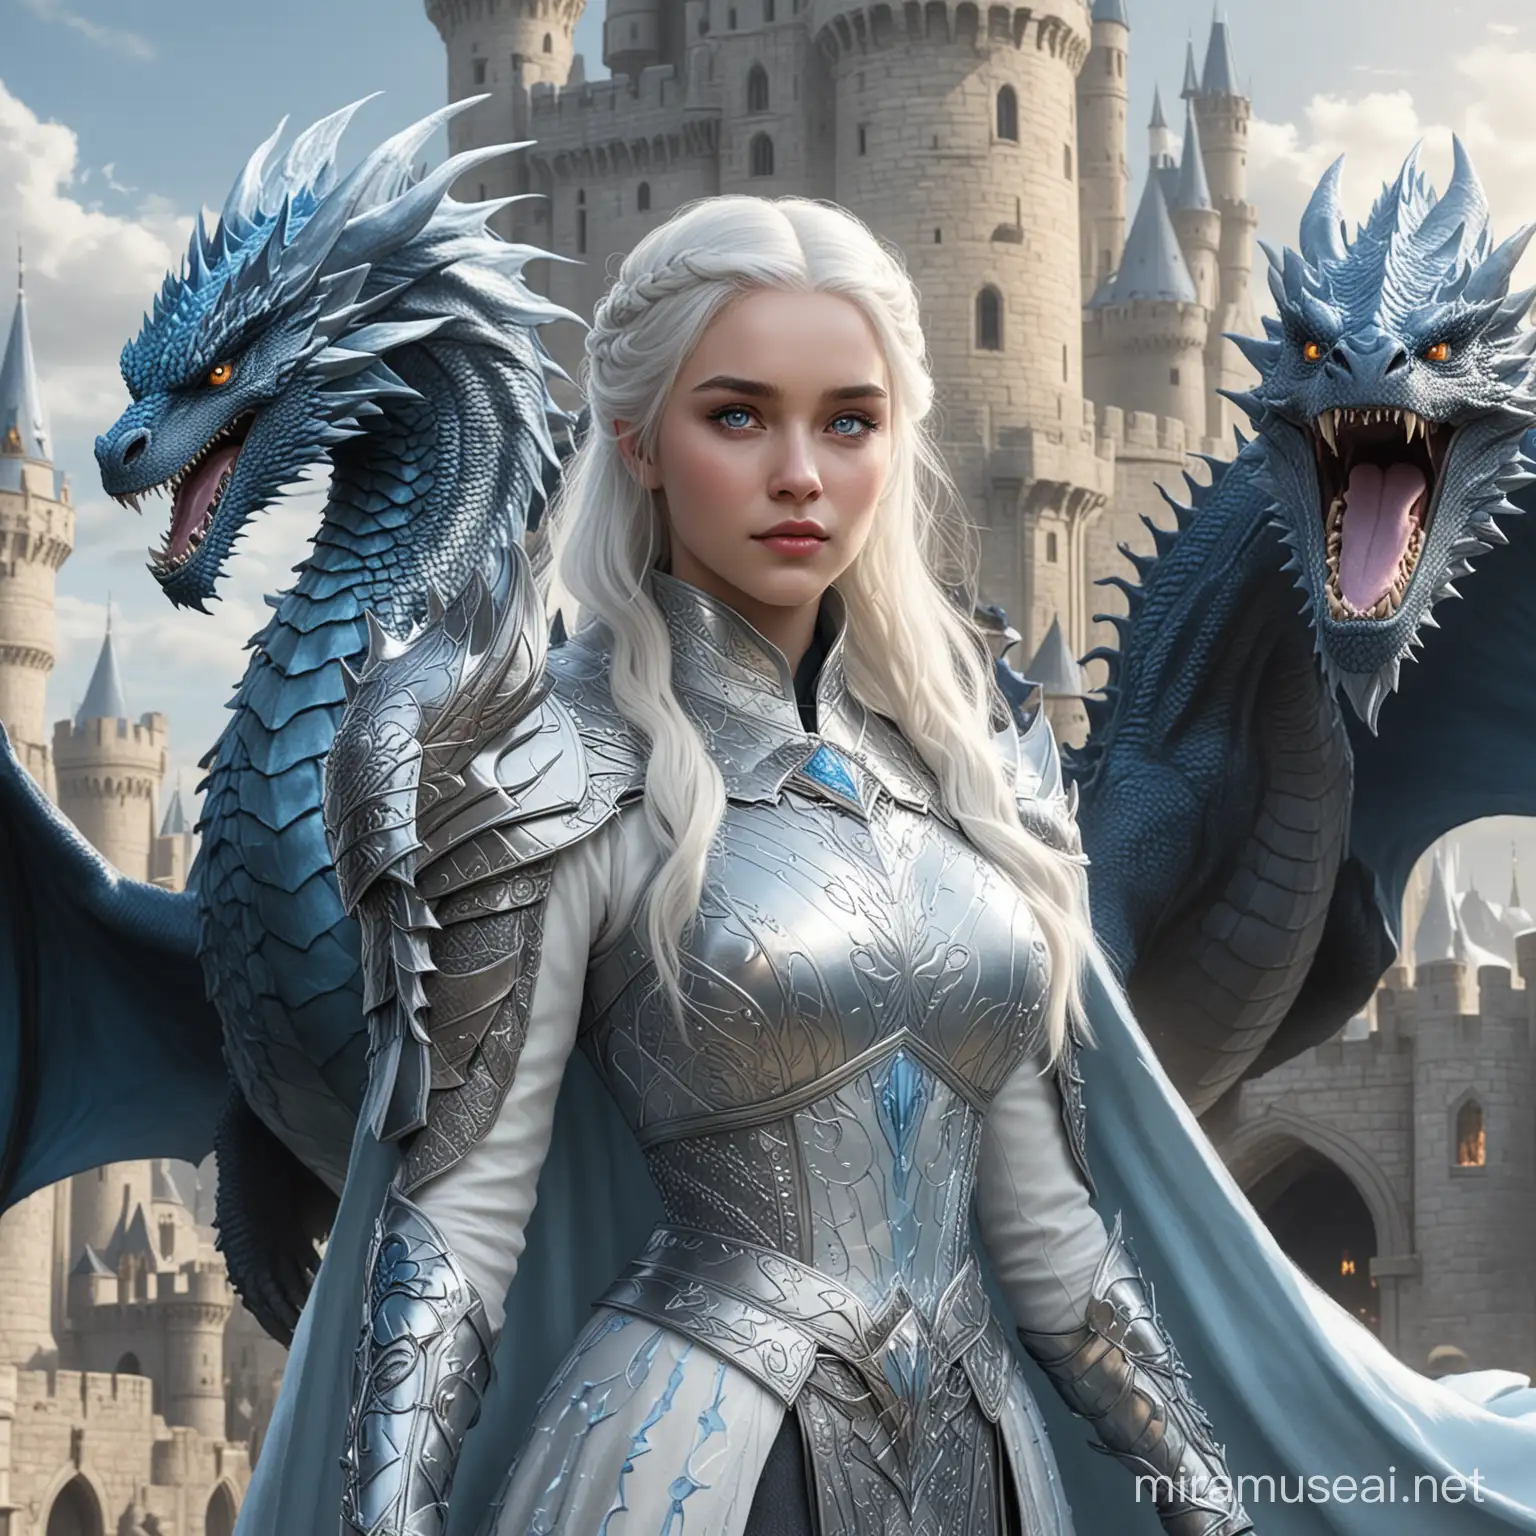 A song of ice and fire character design, Targaryen princess, black hair, light blue eyes, pale skin, castle background, silver and blue dragon in background  